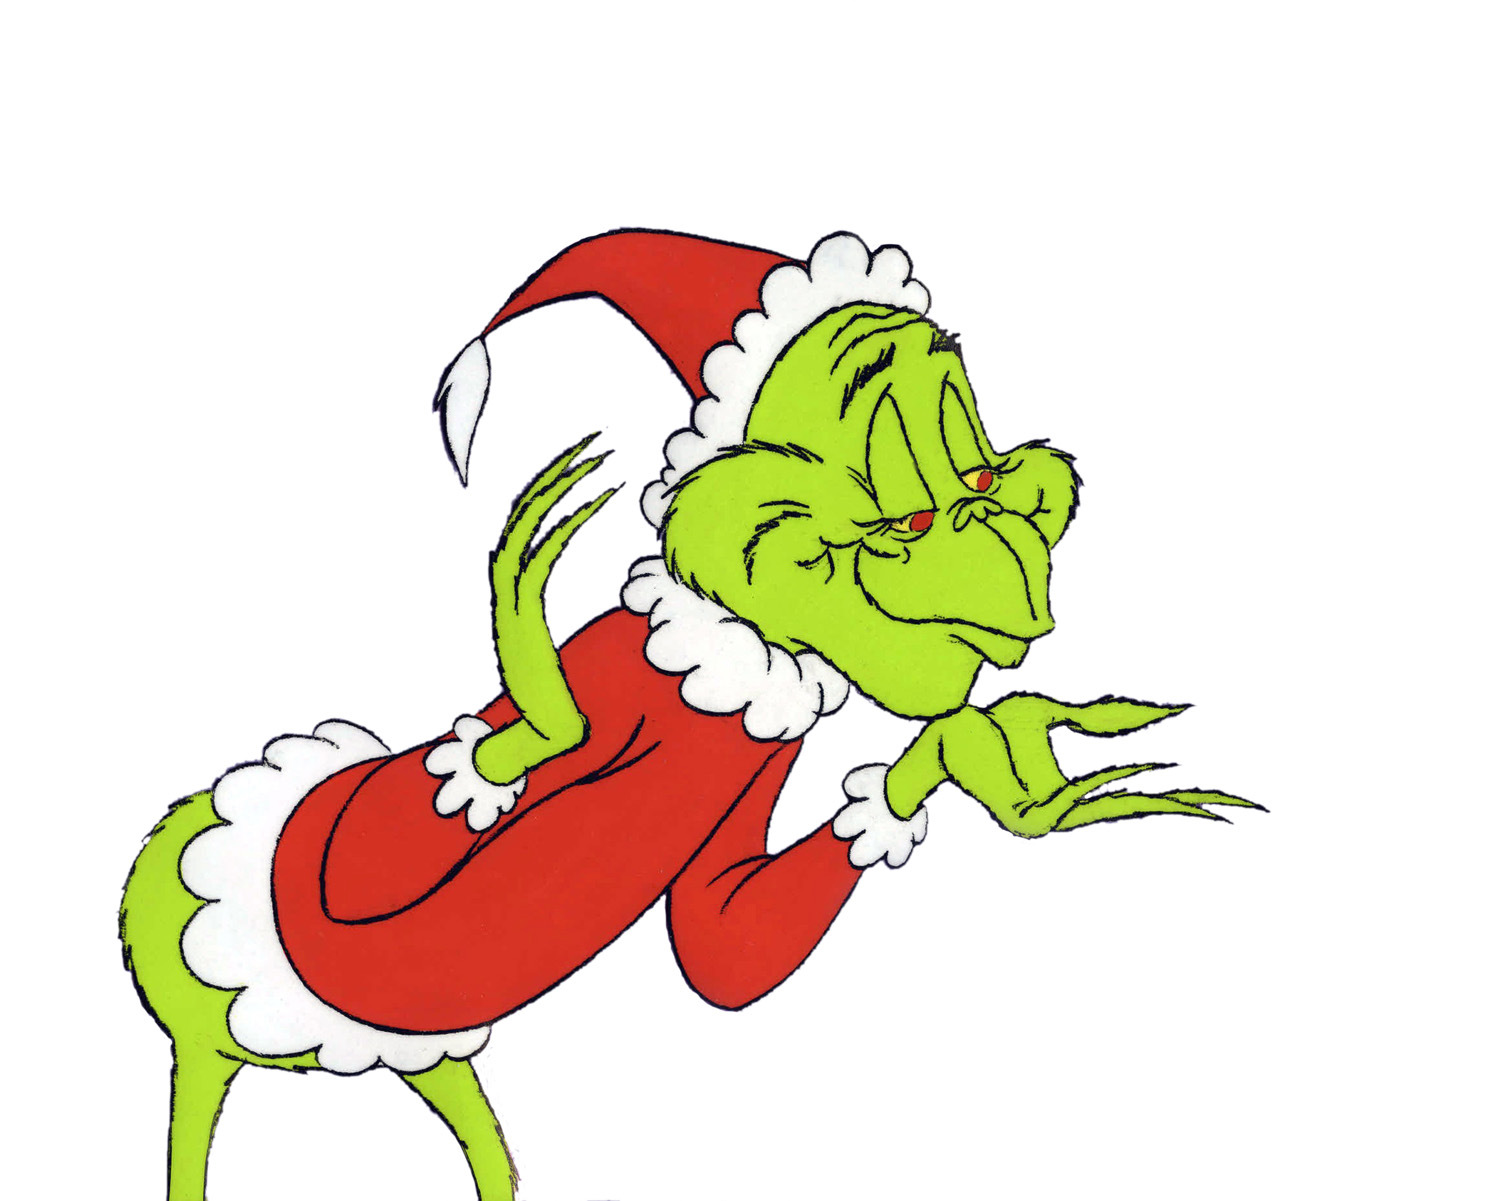 Pix For u0026gt; The Grinch Who Stole Christmas Book Characters